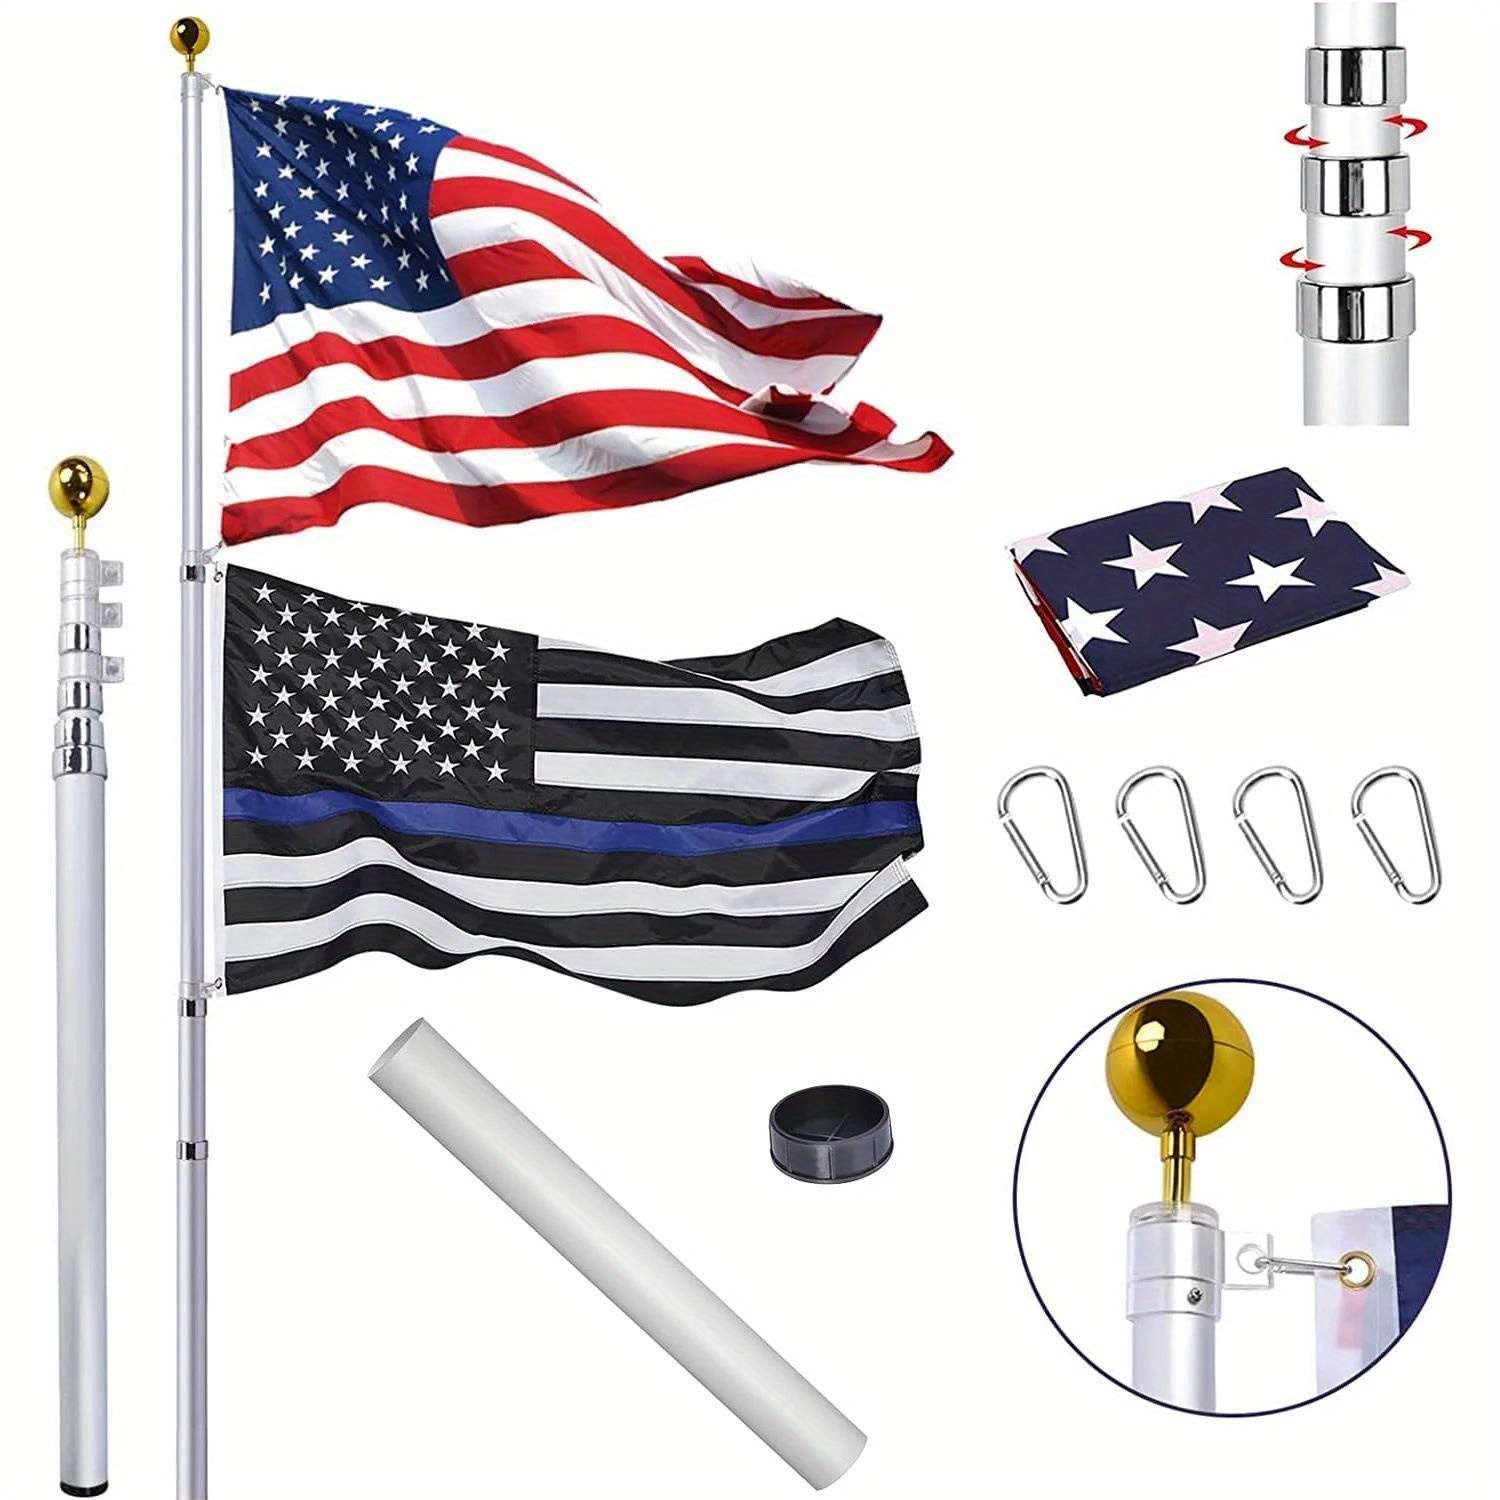 

20ft Telescopic Aluminum Flagpole With Free Gold Ball Finial Kit & 3x5 Ft Us Flag, Outdoor Heavy-duty Thick Tube, Upgraded 1.2 Mm Aluminum Wall Multi-section Halyard Pole